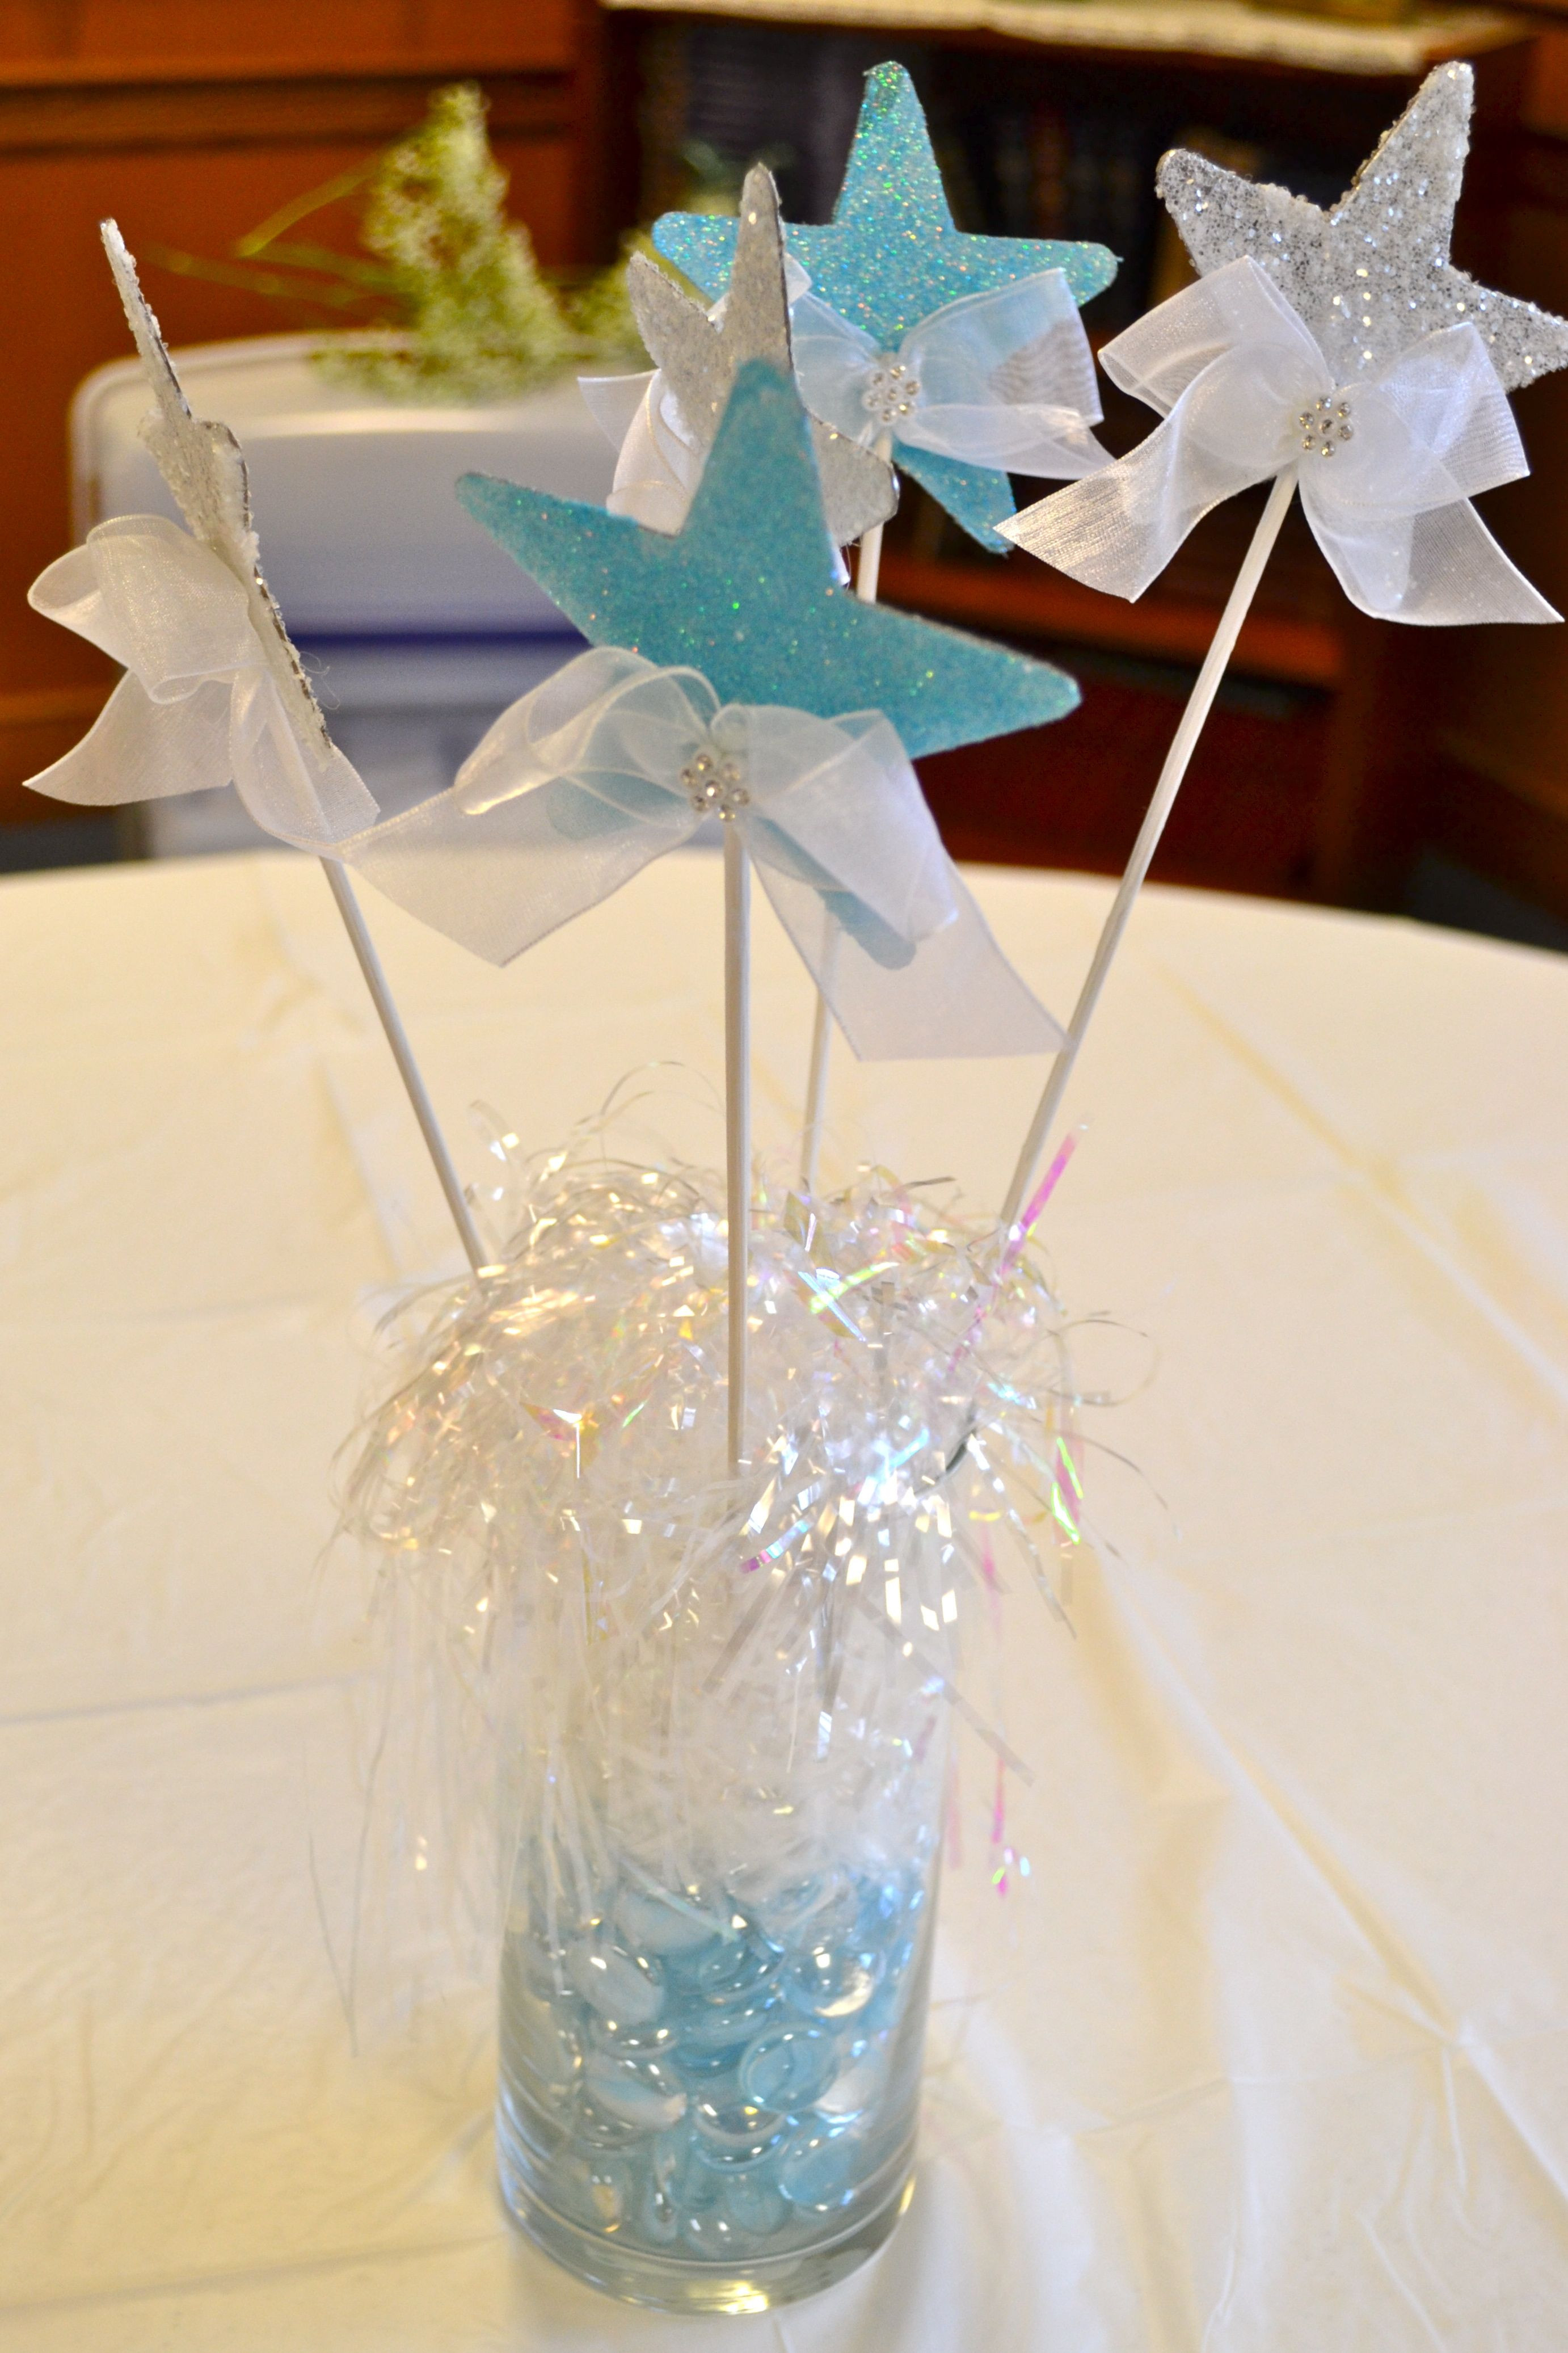 13 Ideal Blue Centerpiece Vases 2024 free download blue centerpiece vases of little star centerpieces empty glass vase filled with silver pertaining to little star centerpieces empty glass vase filled with silver white and blue shiny stuff a